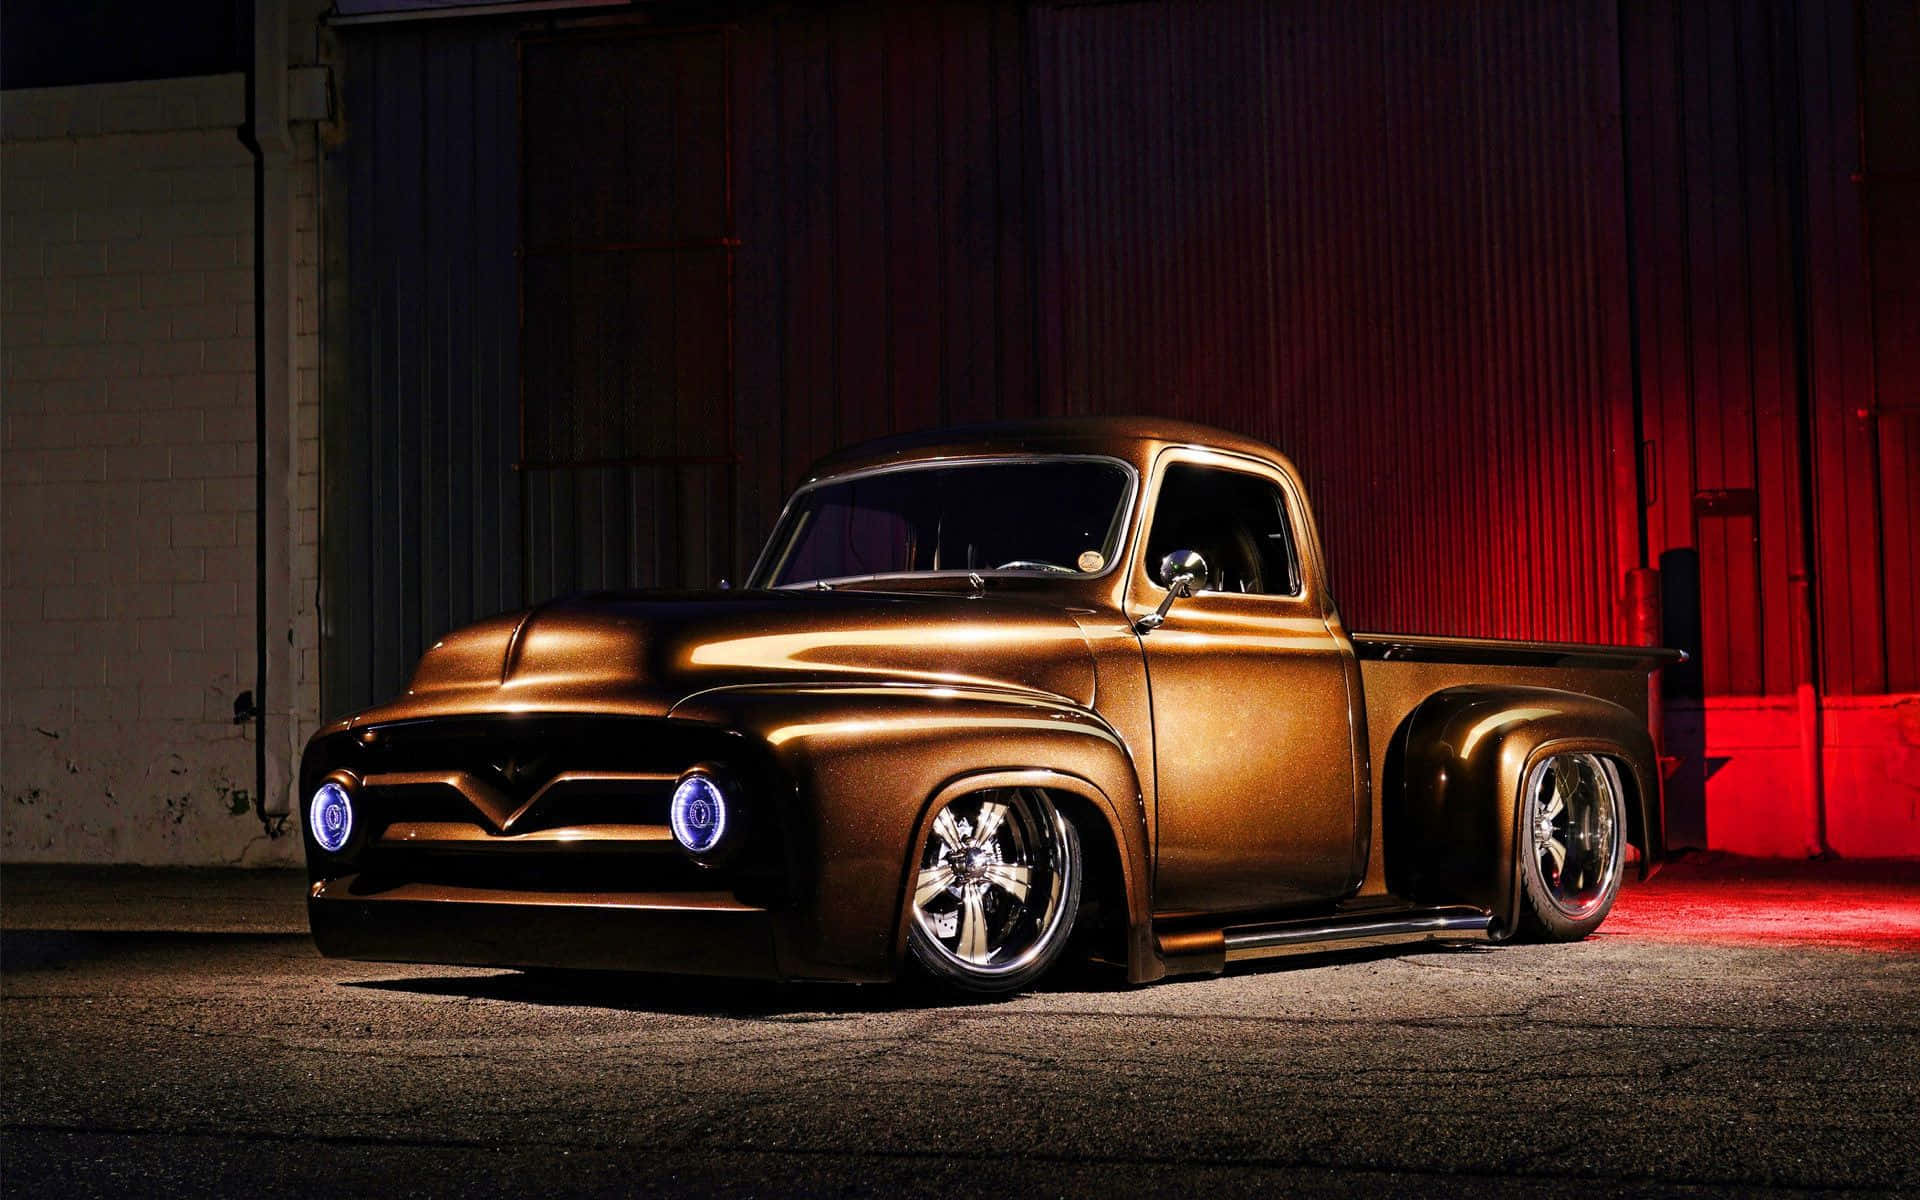 Get Low with This Flamingo-Painted Lowrider Truck Wallpaper